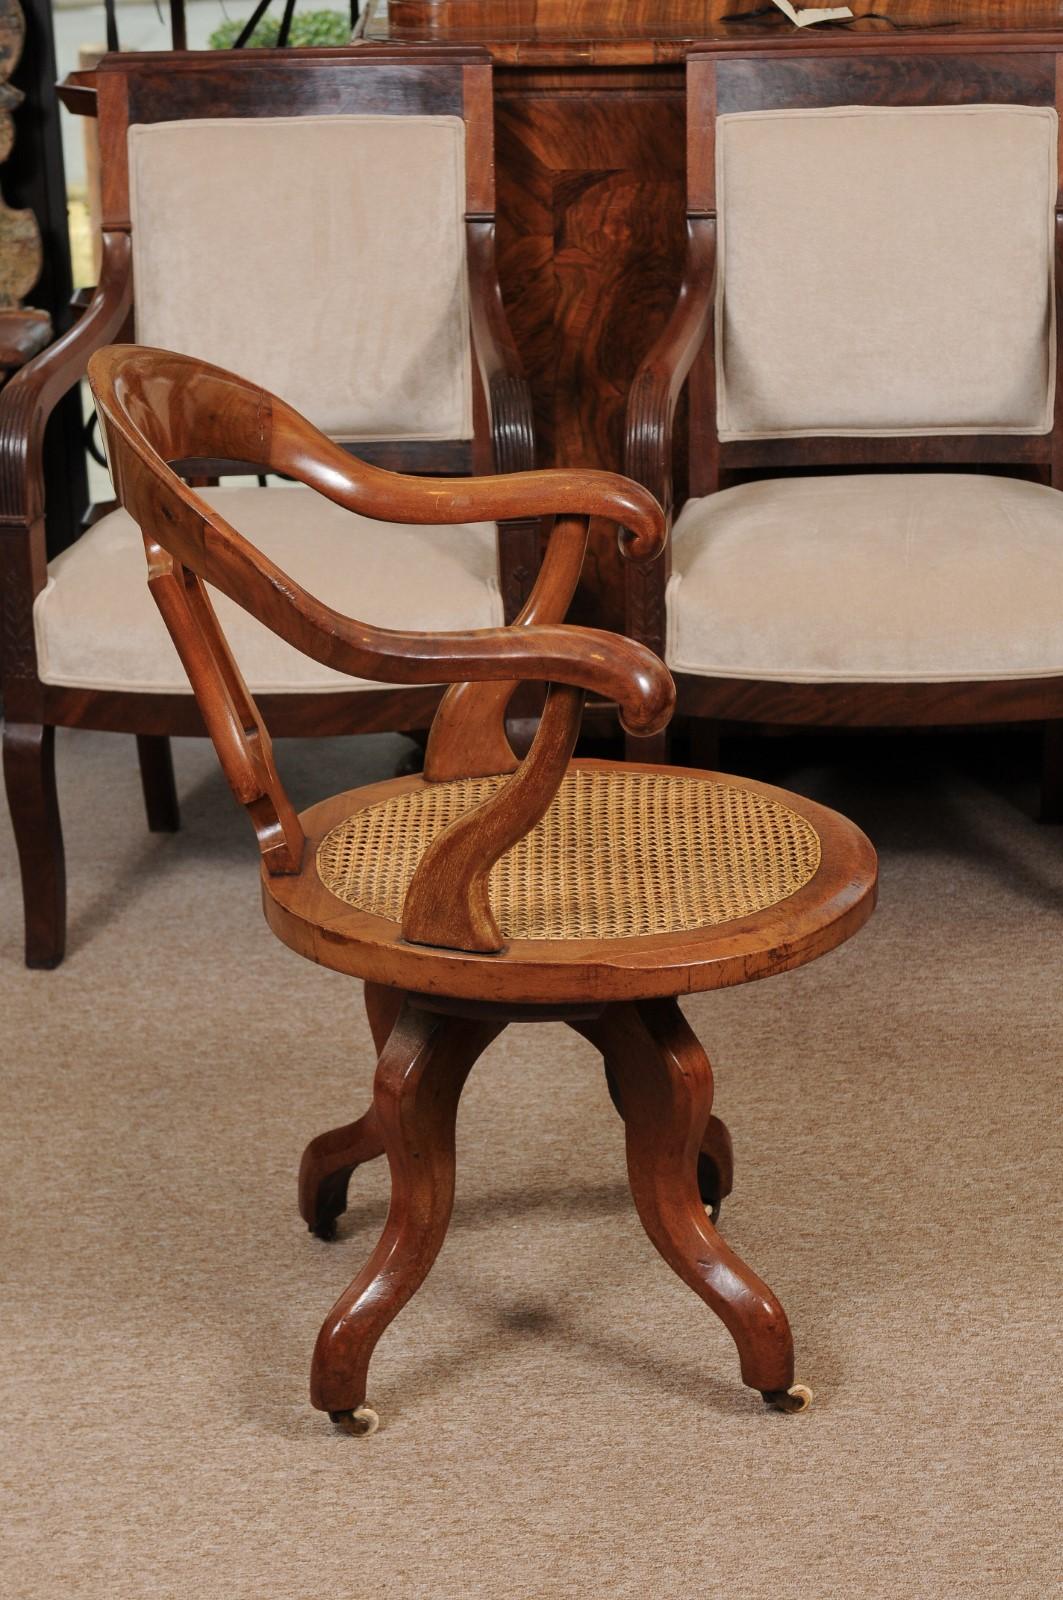 Victorian Walnut Desk Chair with Swivel Caned Seat, England, Late 19th Century For Sale 2